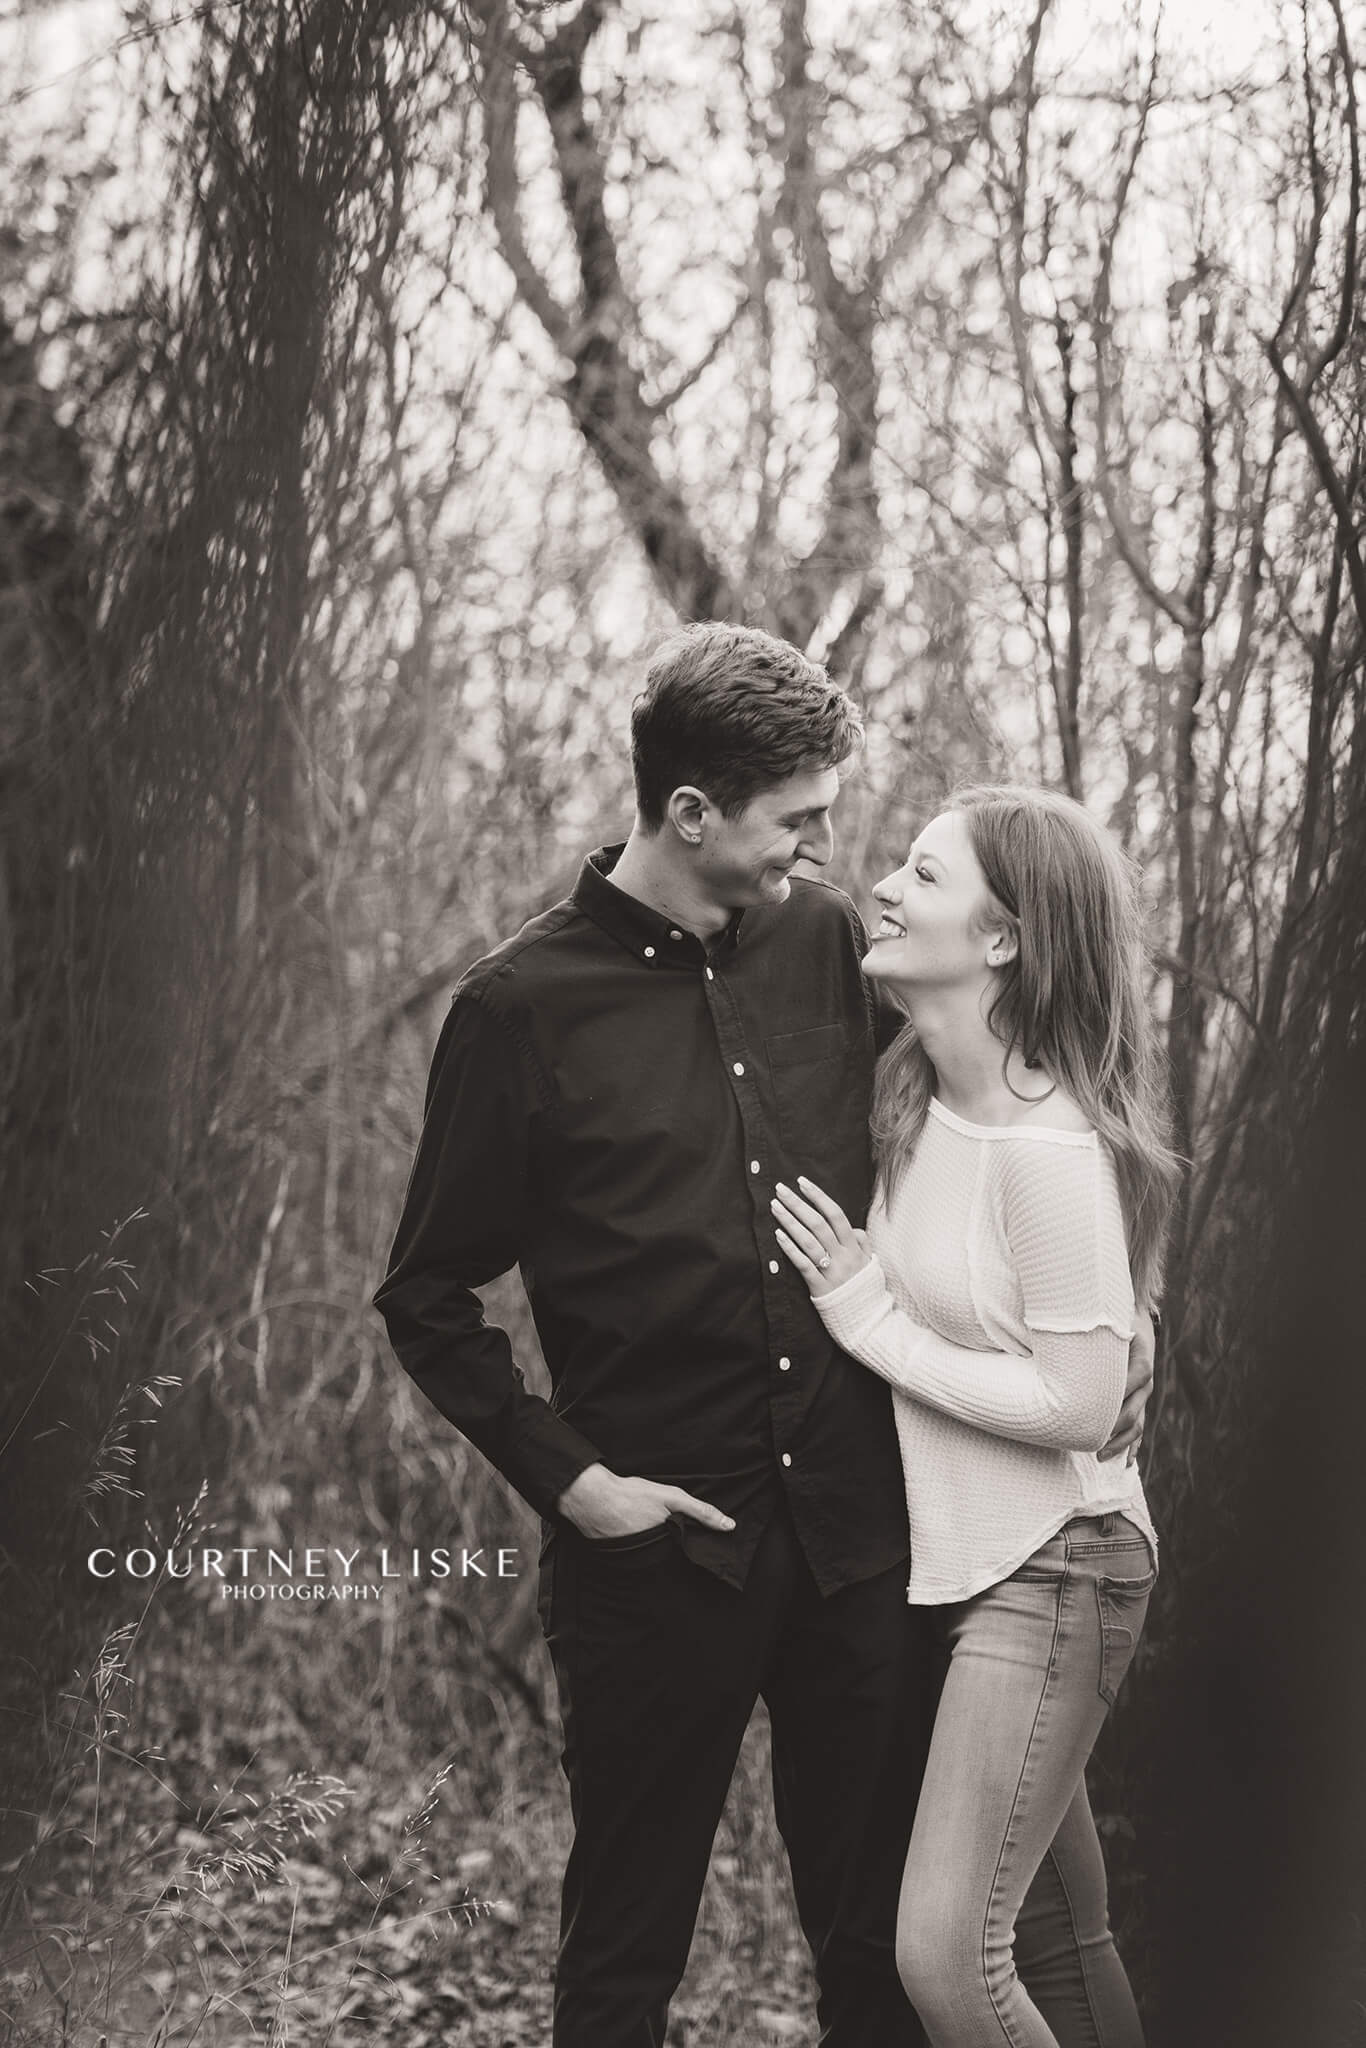 Engagement session with Courtney Liske Photography